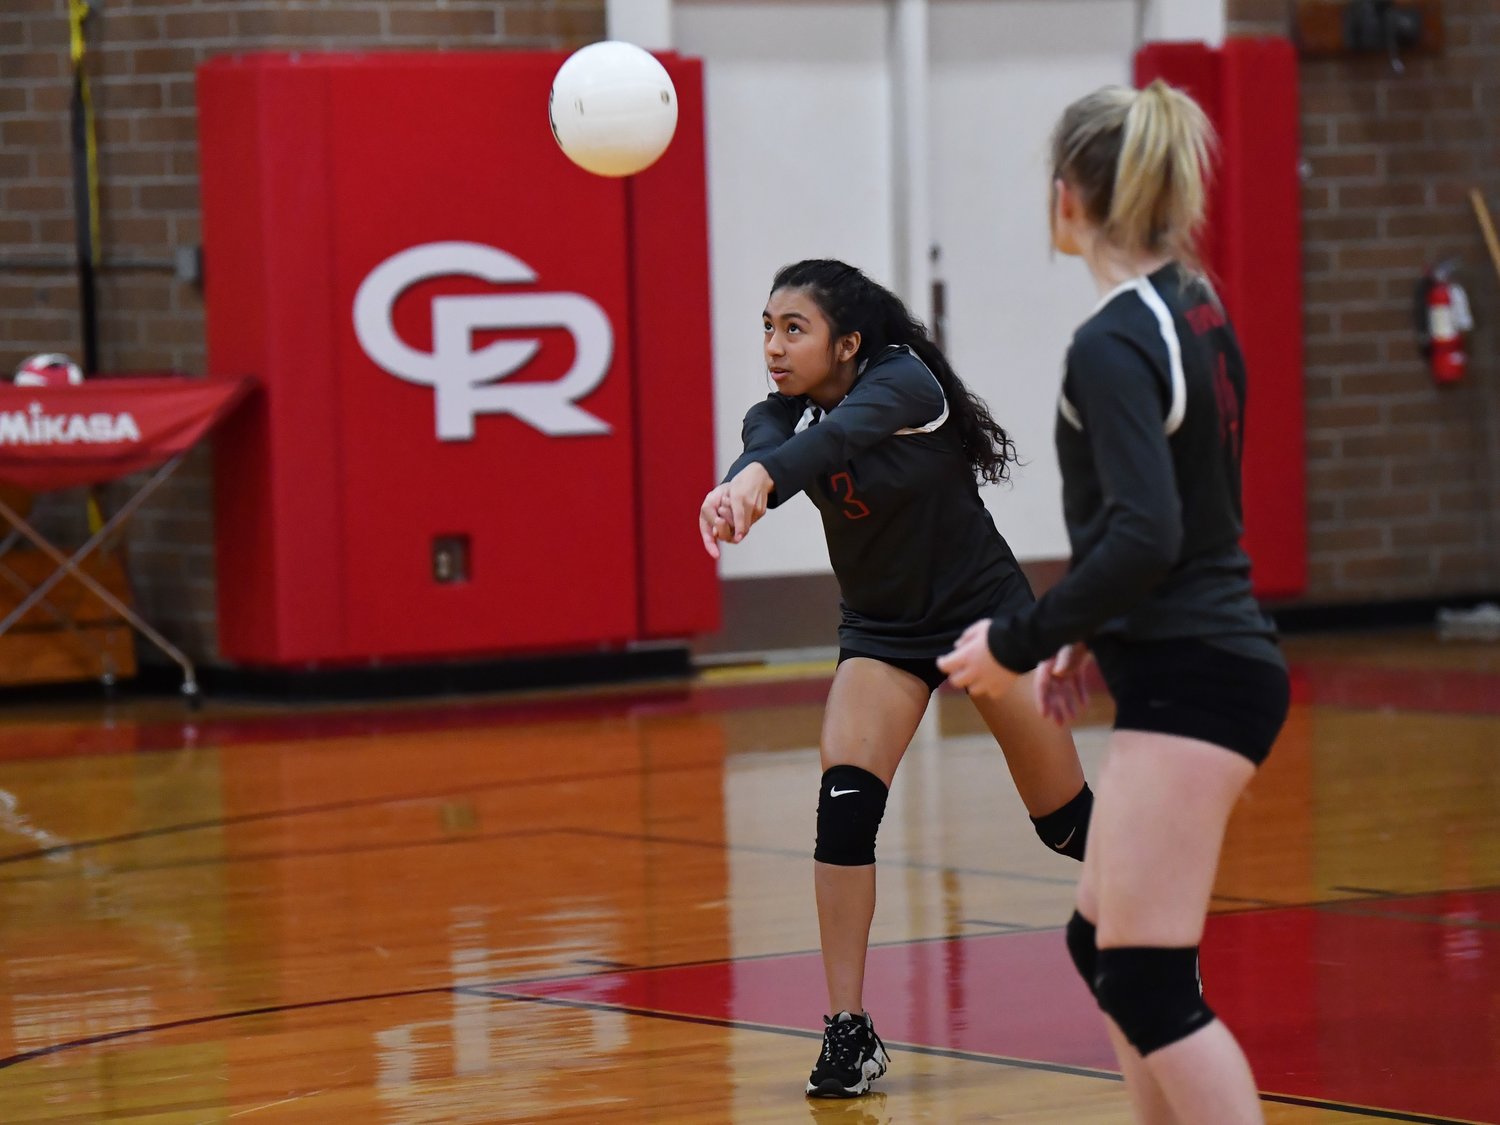 Tenino sophomore Natalie Davis digs up a serve in an opening round loss to Castle Rock in the 1A District 4 playoffs Nov. 3.